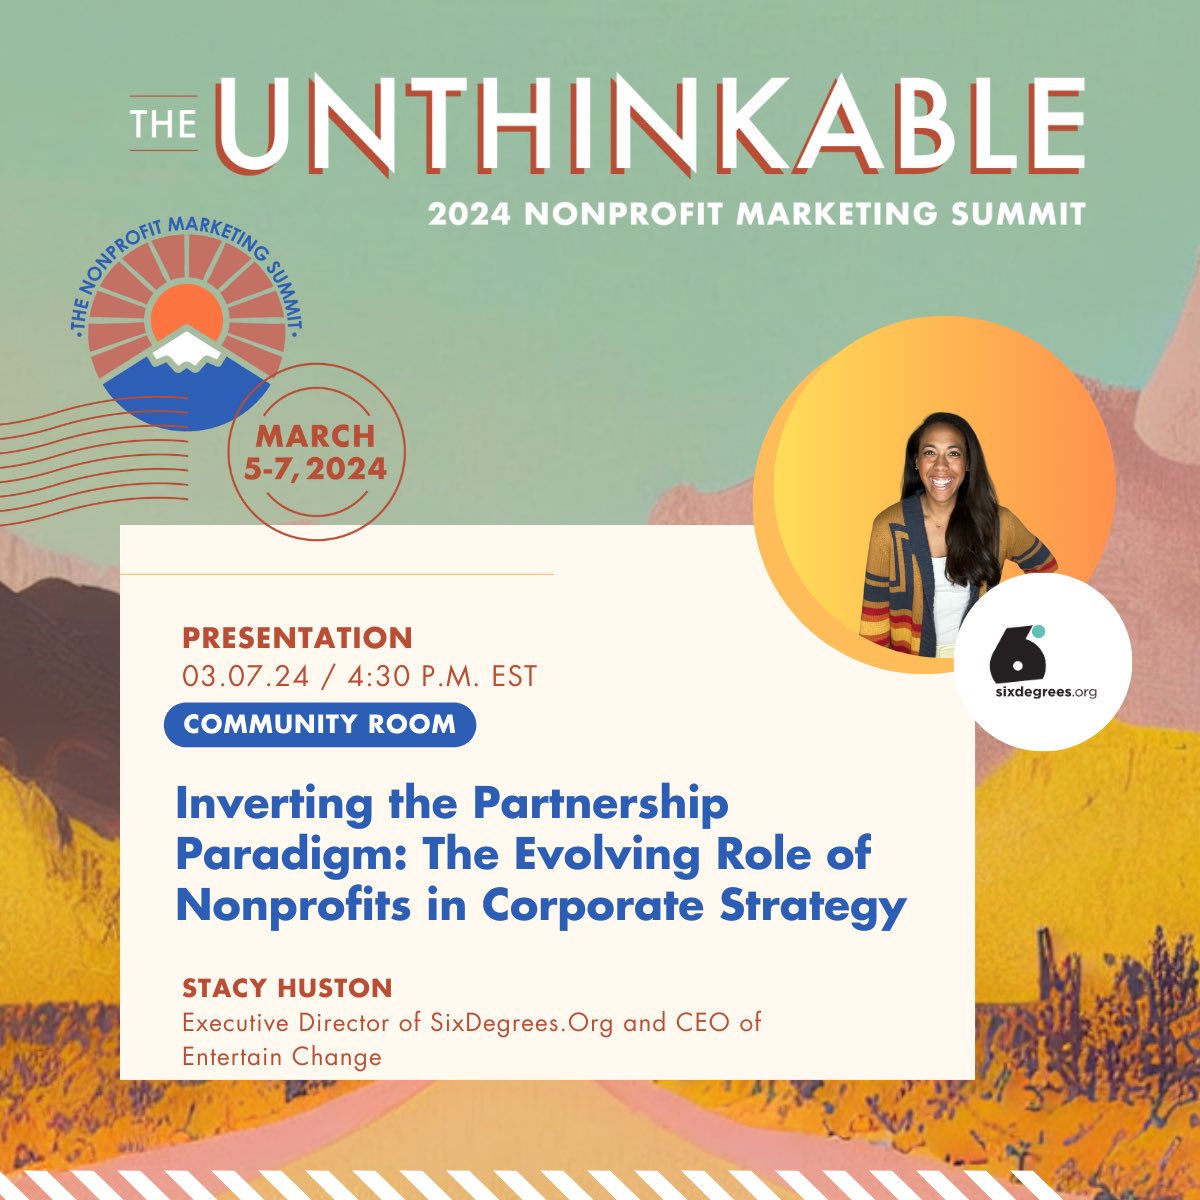 The #NMS2024 is back THIS March, and our very own @thestacyhuston will be speaking! Join us on March 7th at 4:30pm for ‘Inverting the Partnership Paradigm’. Save your free seat today: bit.ly/3uCLpTx. Unthinkable growth awaits. #fundraising